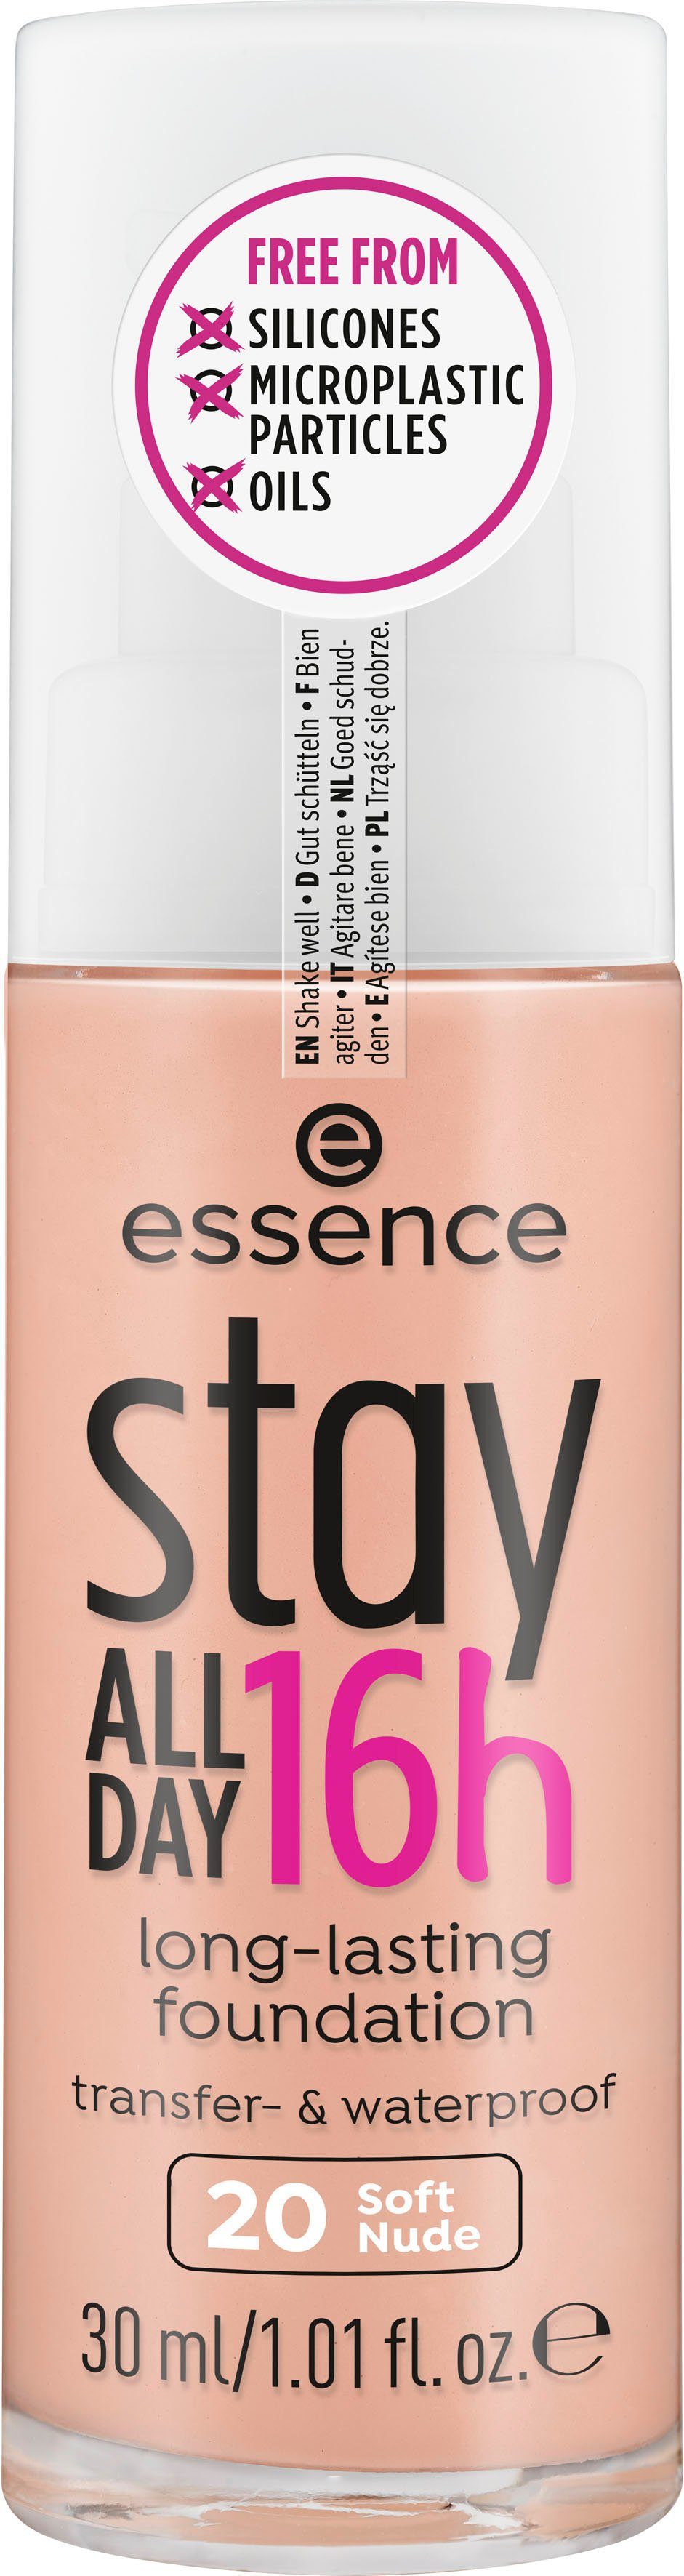 ALL 16h long-lasting, Essence stay DAY Foundation